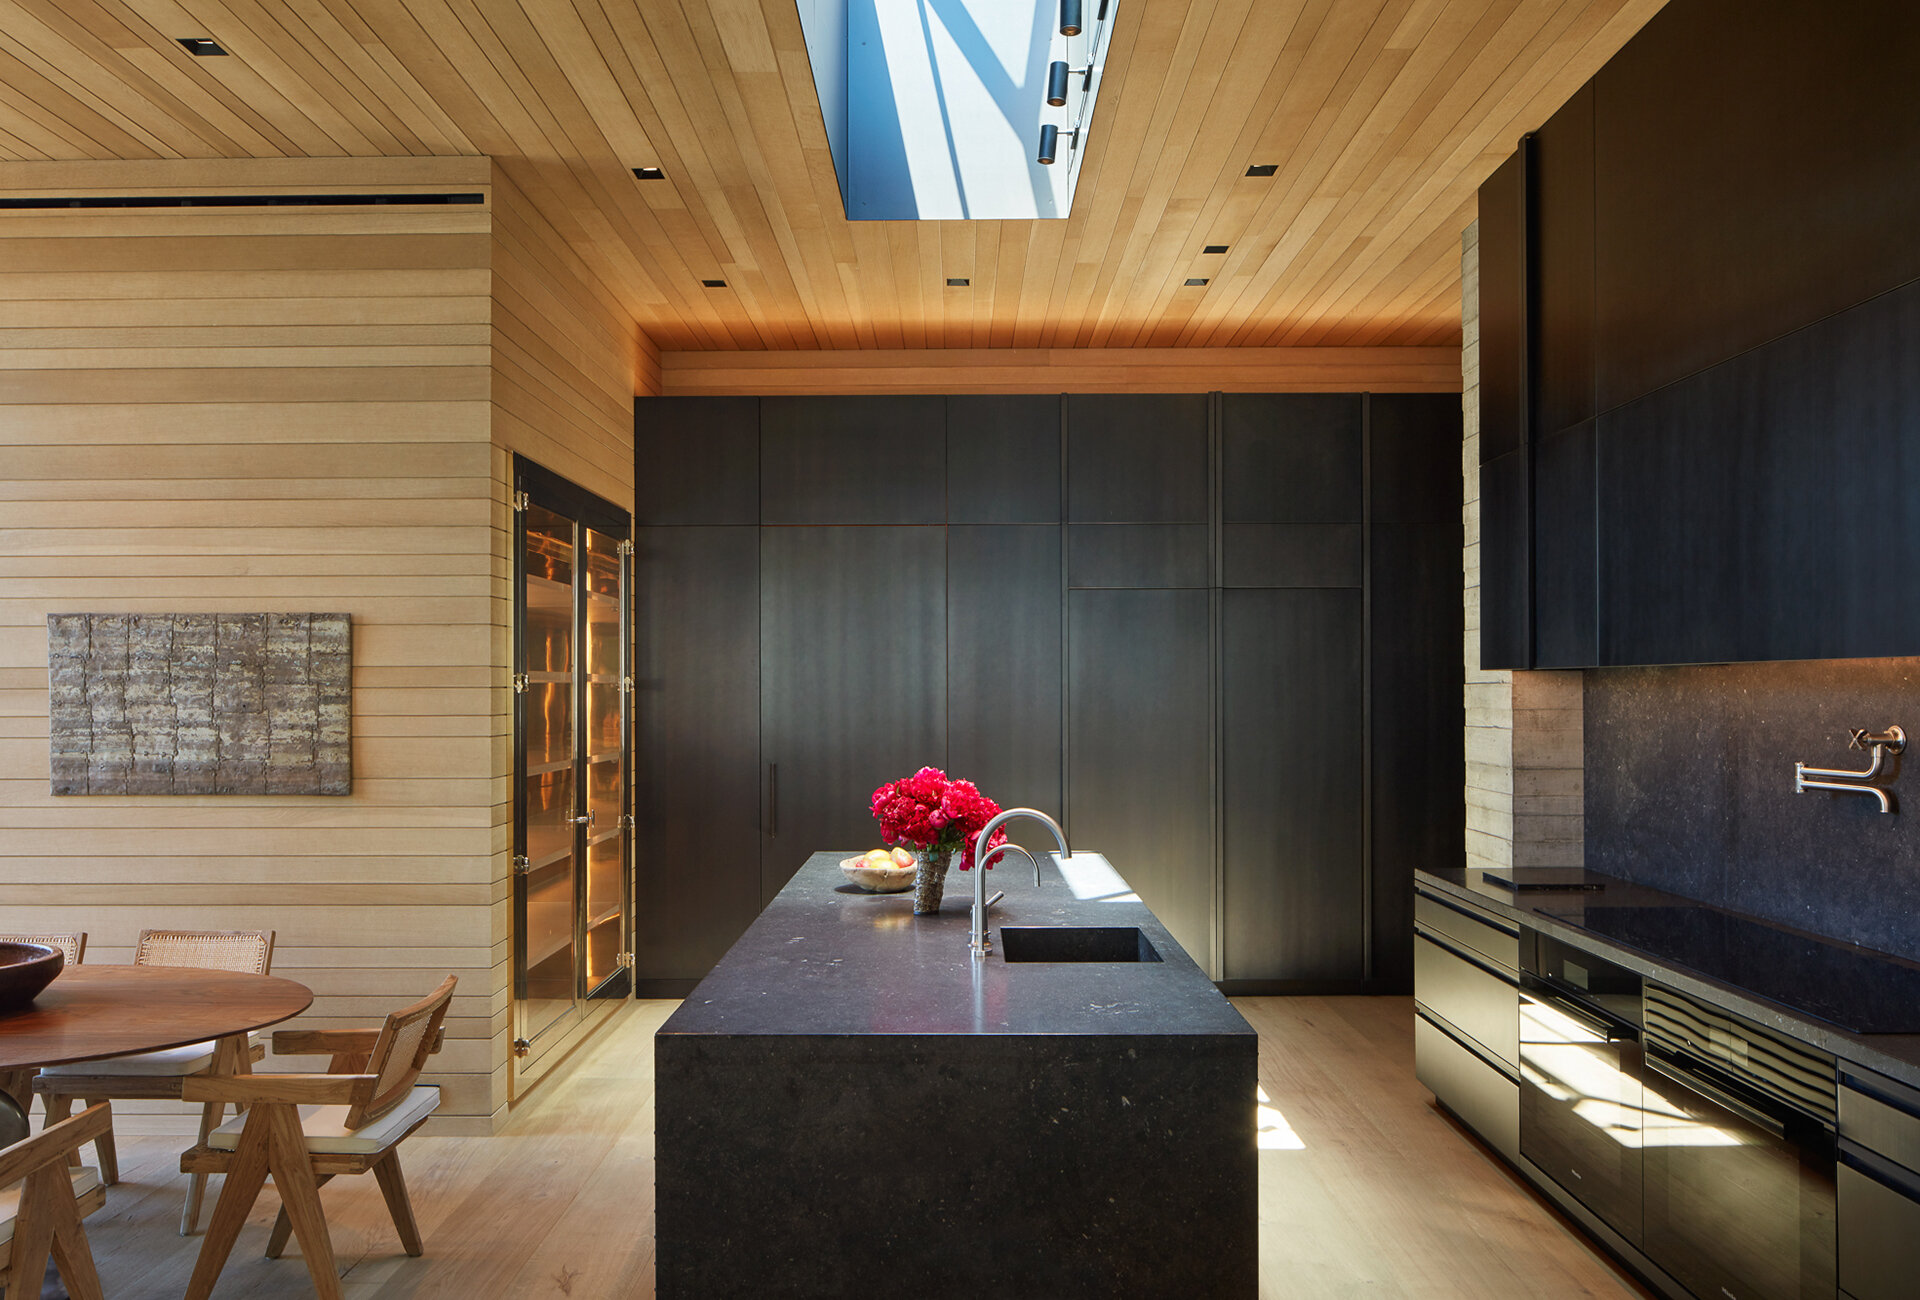  Custom luxury home general contractor built modern private residence in the Pacific Palisades neighborhood of Los Angeles featuring stunning dining room and kitchen with wood wall panels and matte black cabinets.  